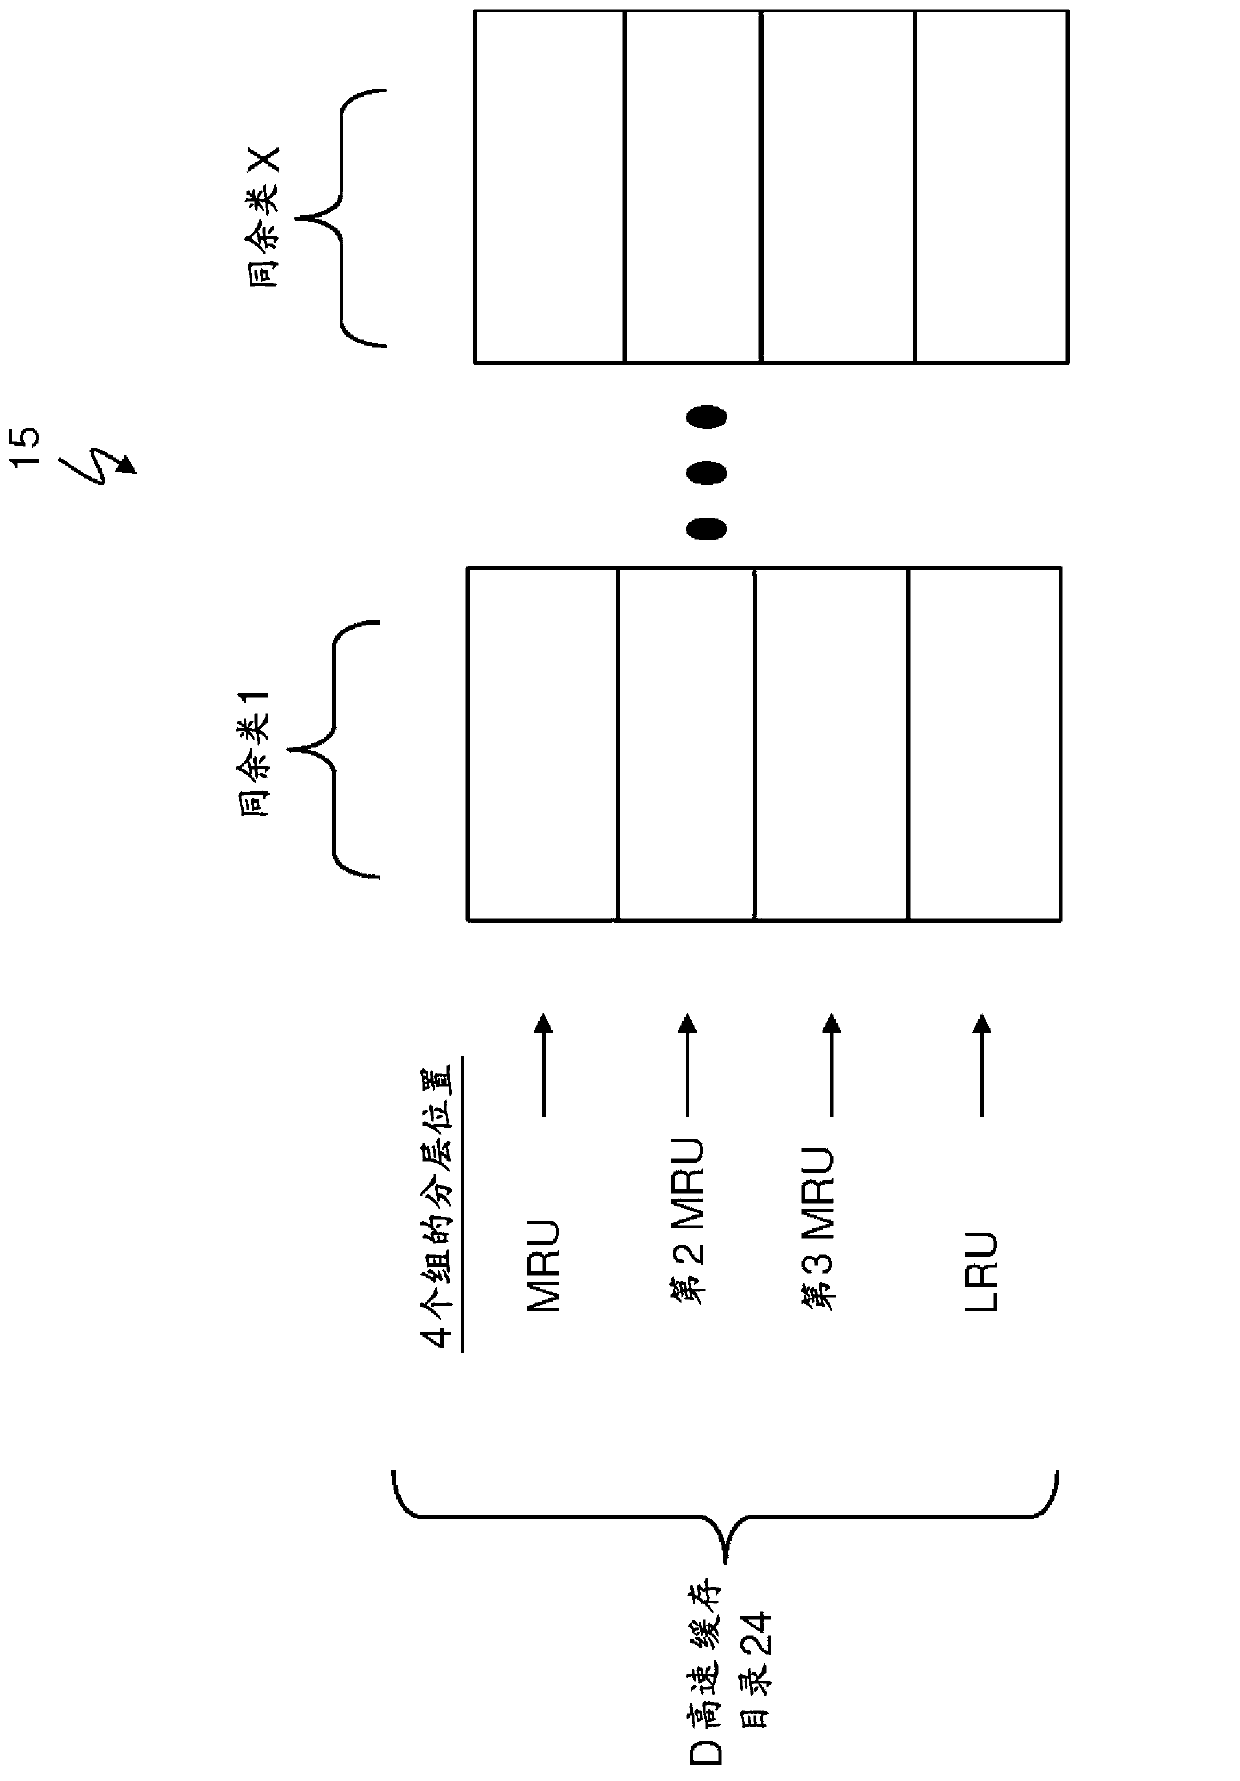 Method and system for determining cache set replacement order based on temporal set recording